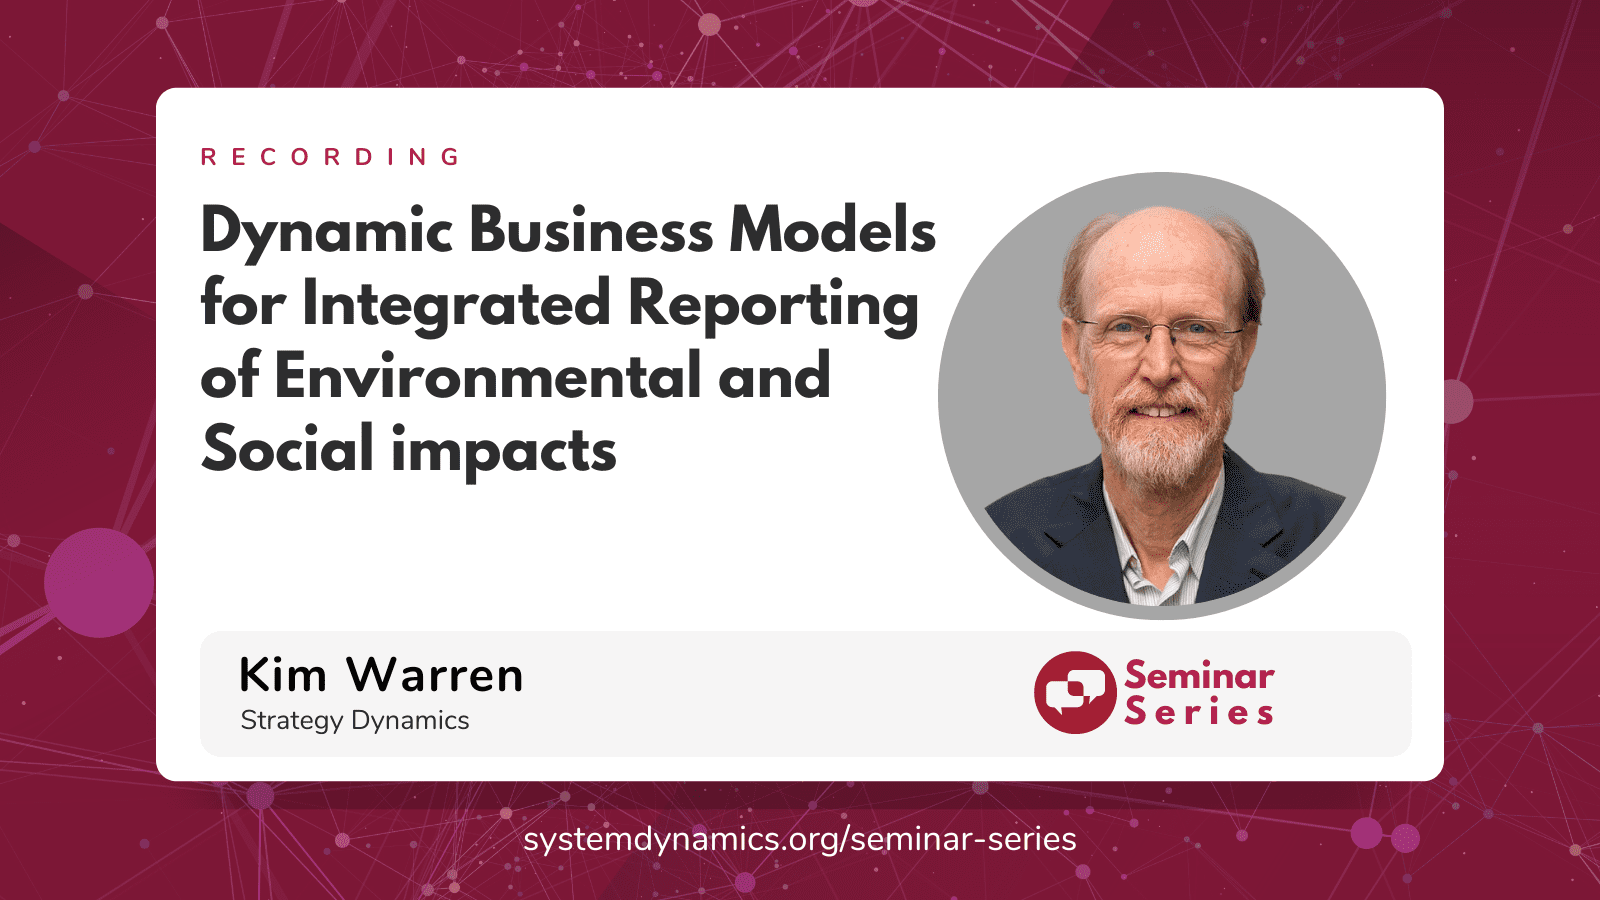 Dynamic Business Models for Integrated Reporting of Environmental and Social Impacts